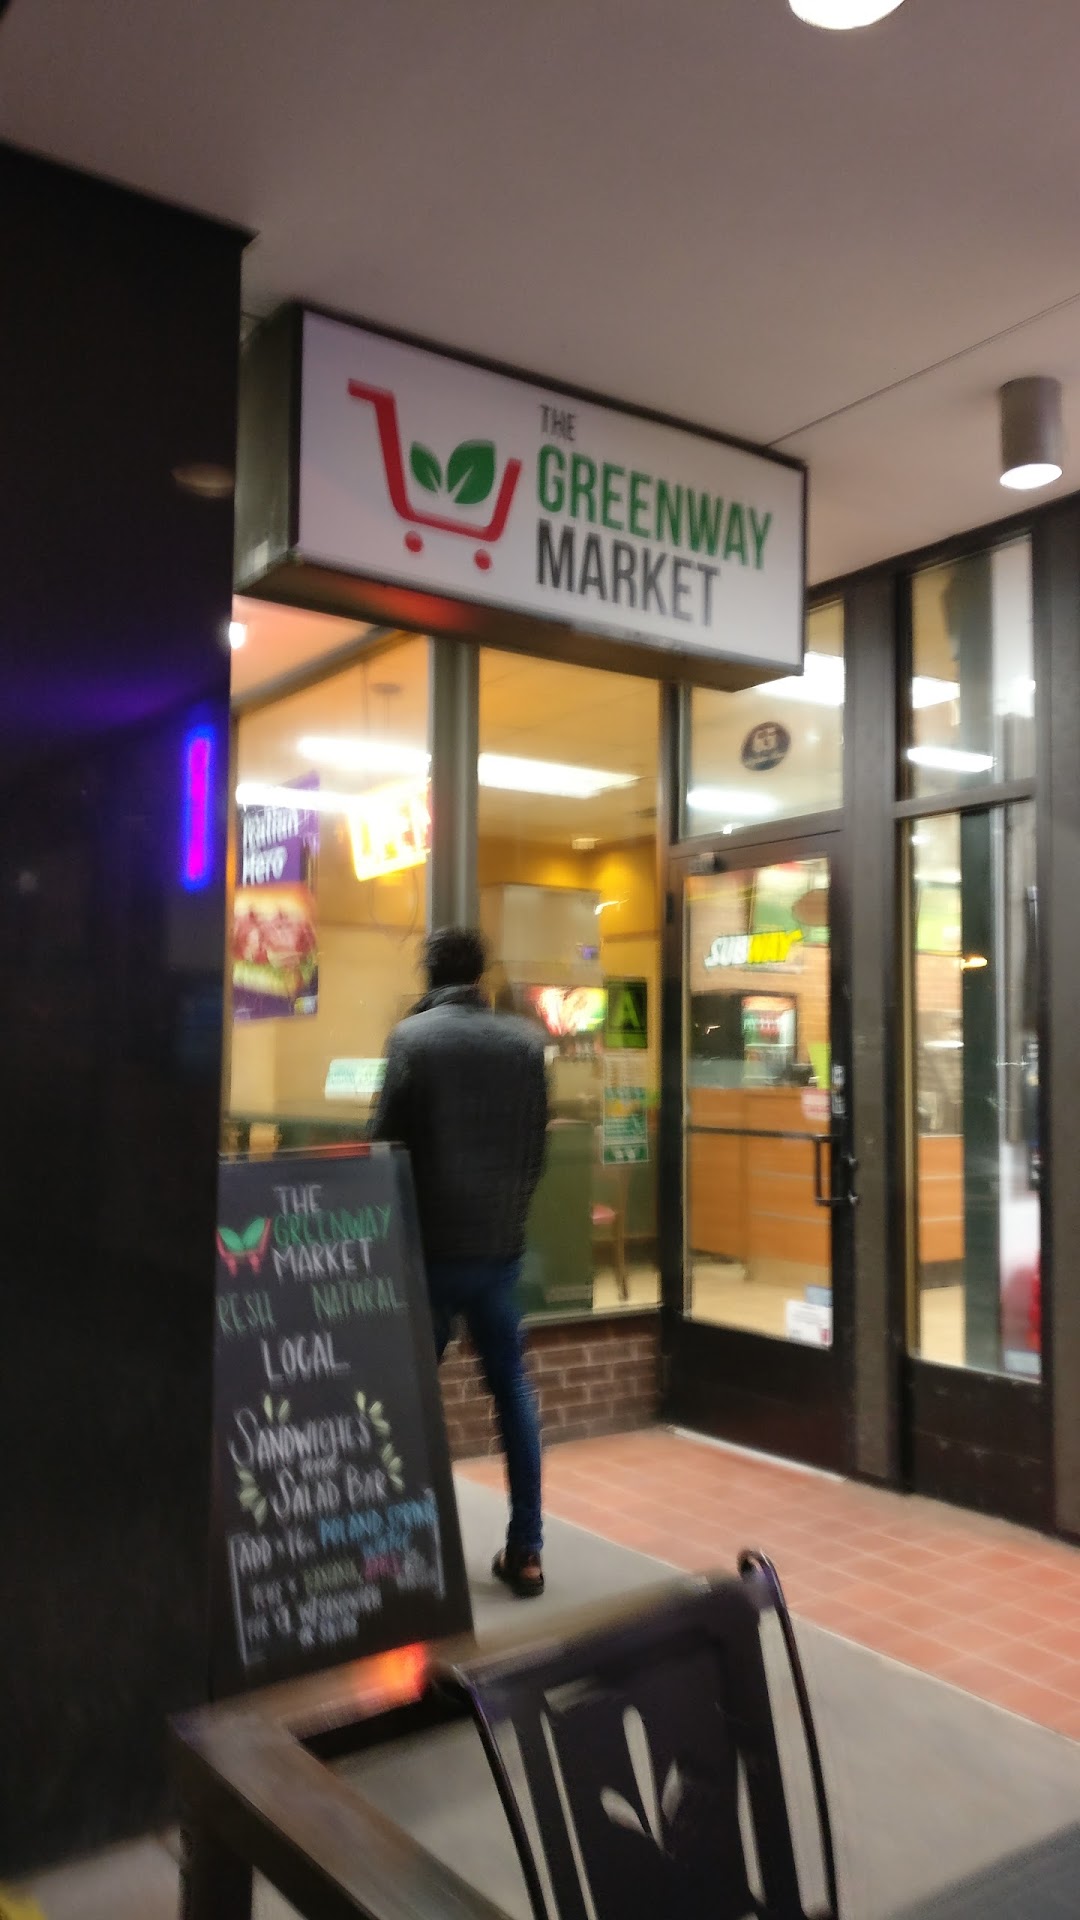 The Greenway Market